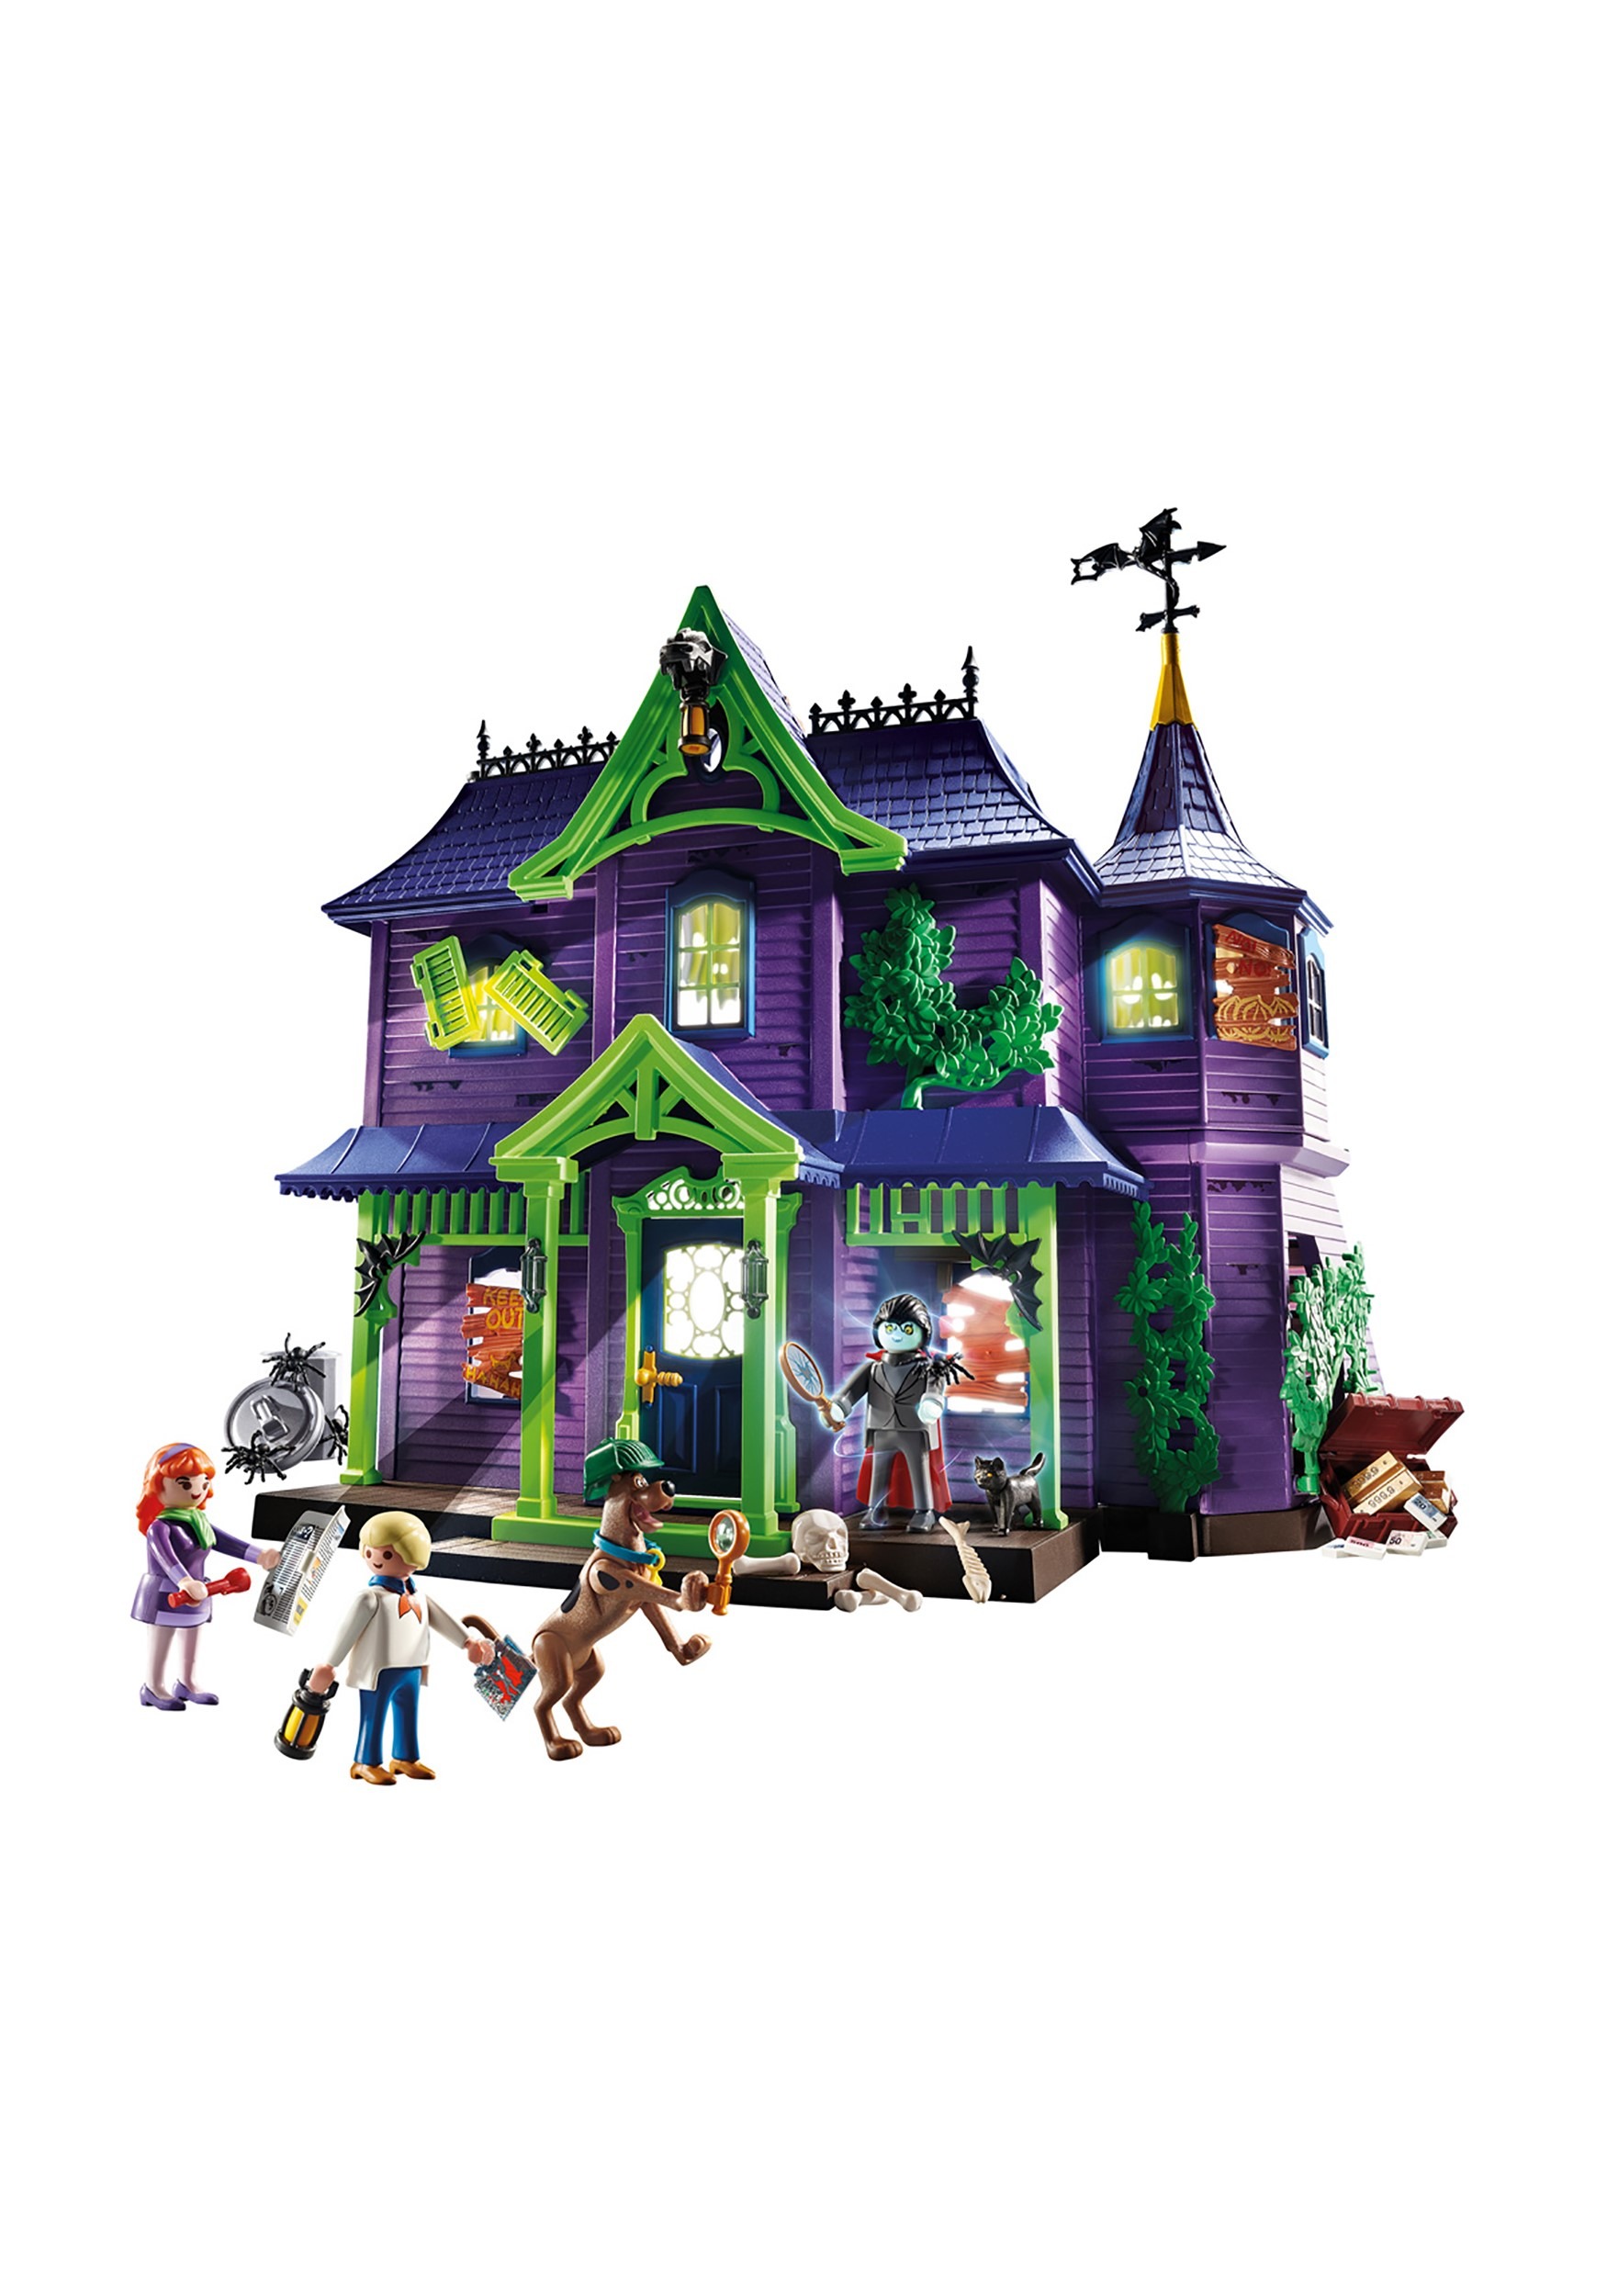 Playmobil Scooby Doo! Adventure in Mystery Mansion Set